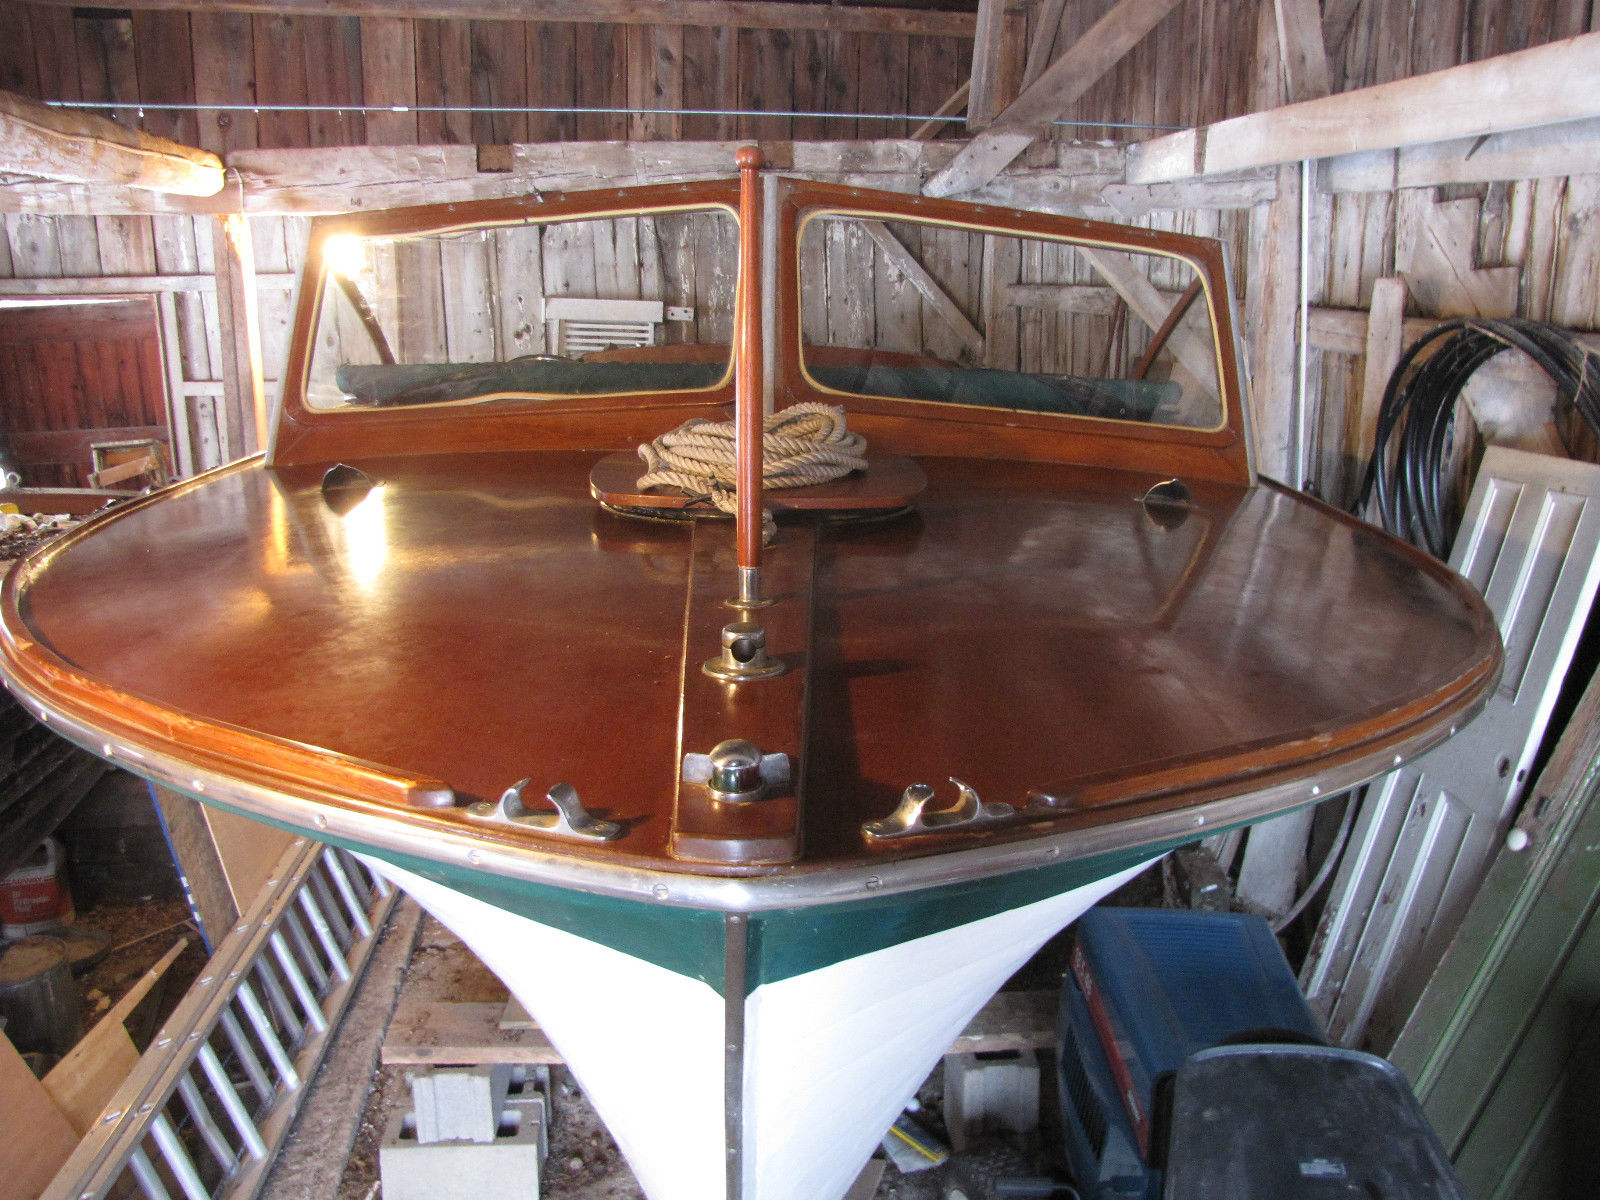 Lyman Sleeper 1963 for sale for $2,000 - Boats-from-USA.com